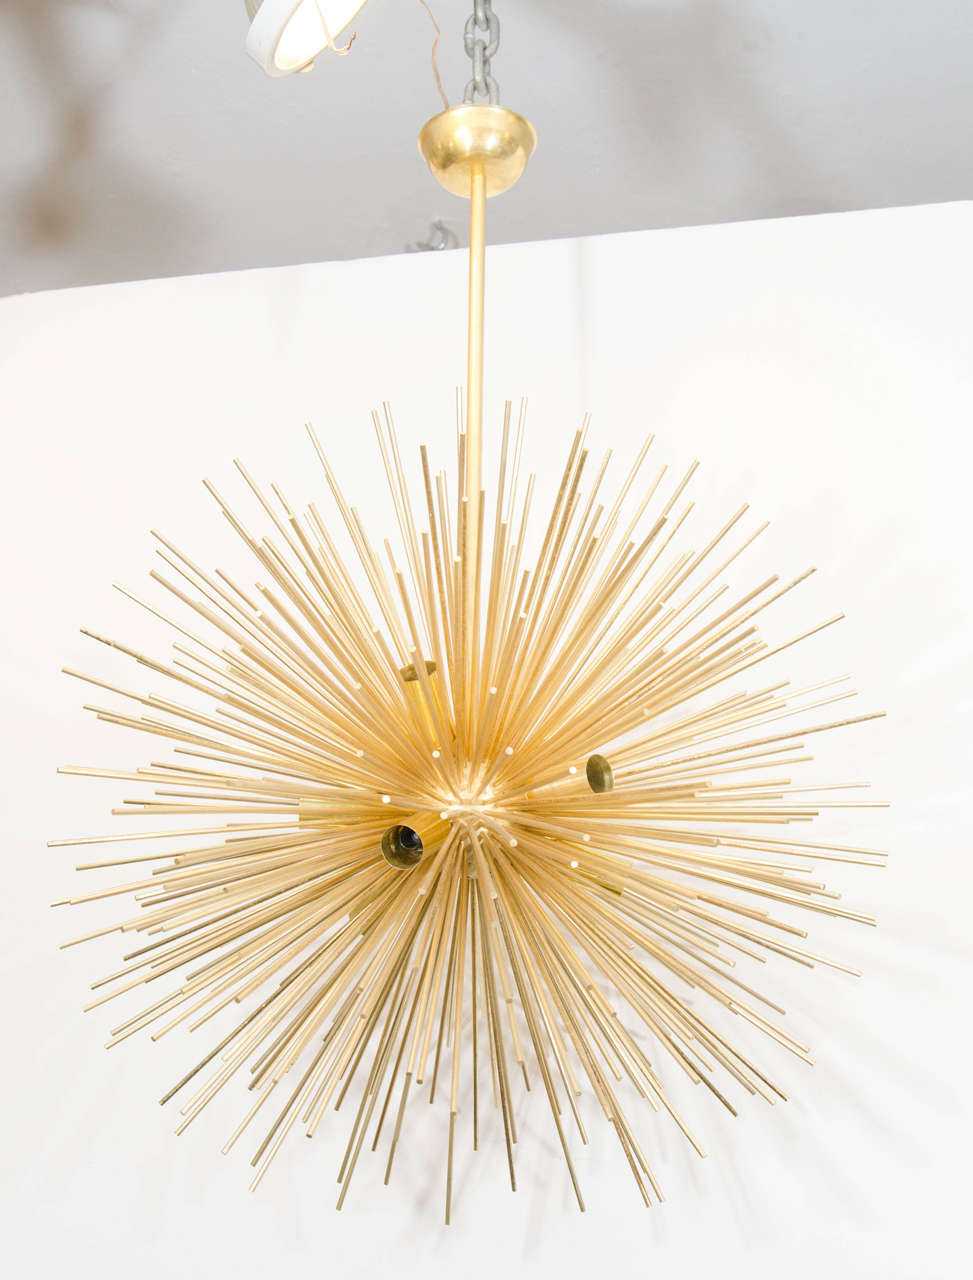 A vintage Sputnik chandelier with multi brass rays emanating out of a brass sphere. European sockets and wiring. Good vintage condition with age appropriate patina.